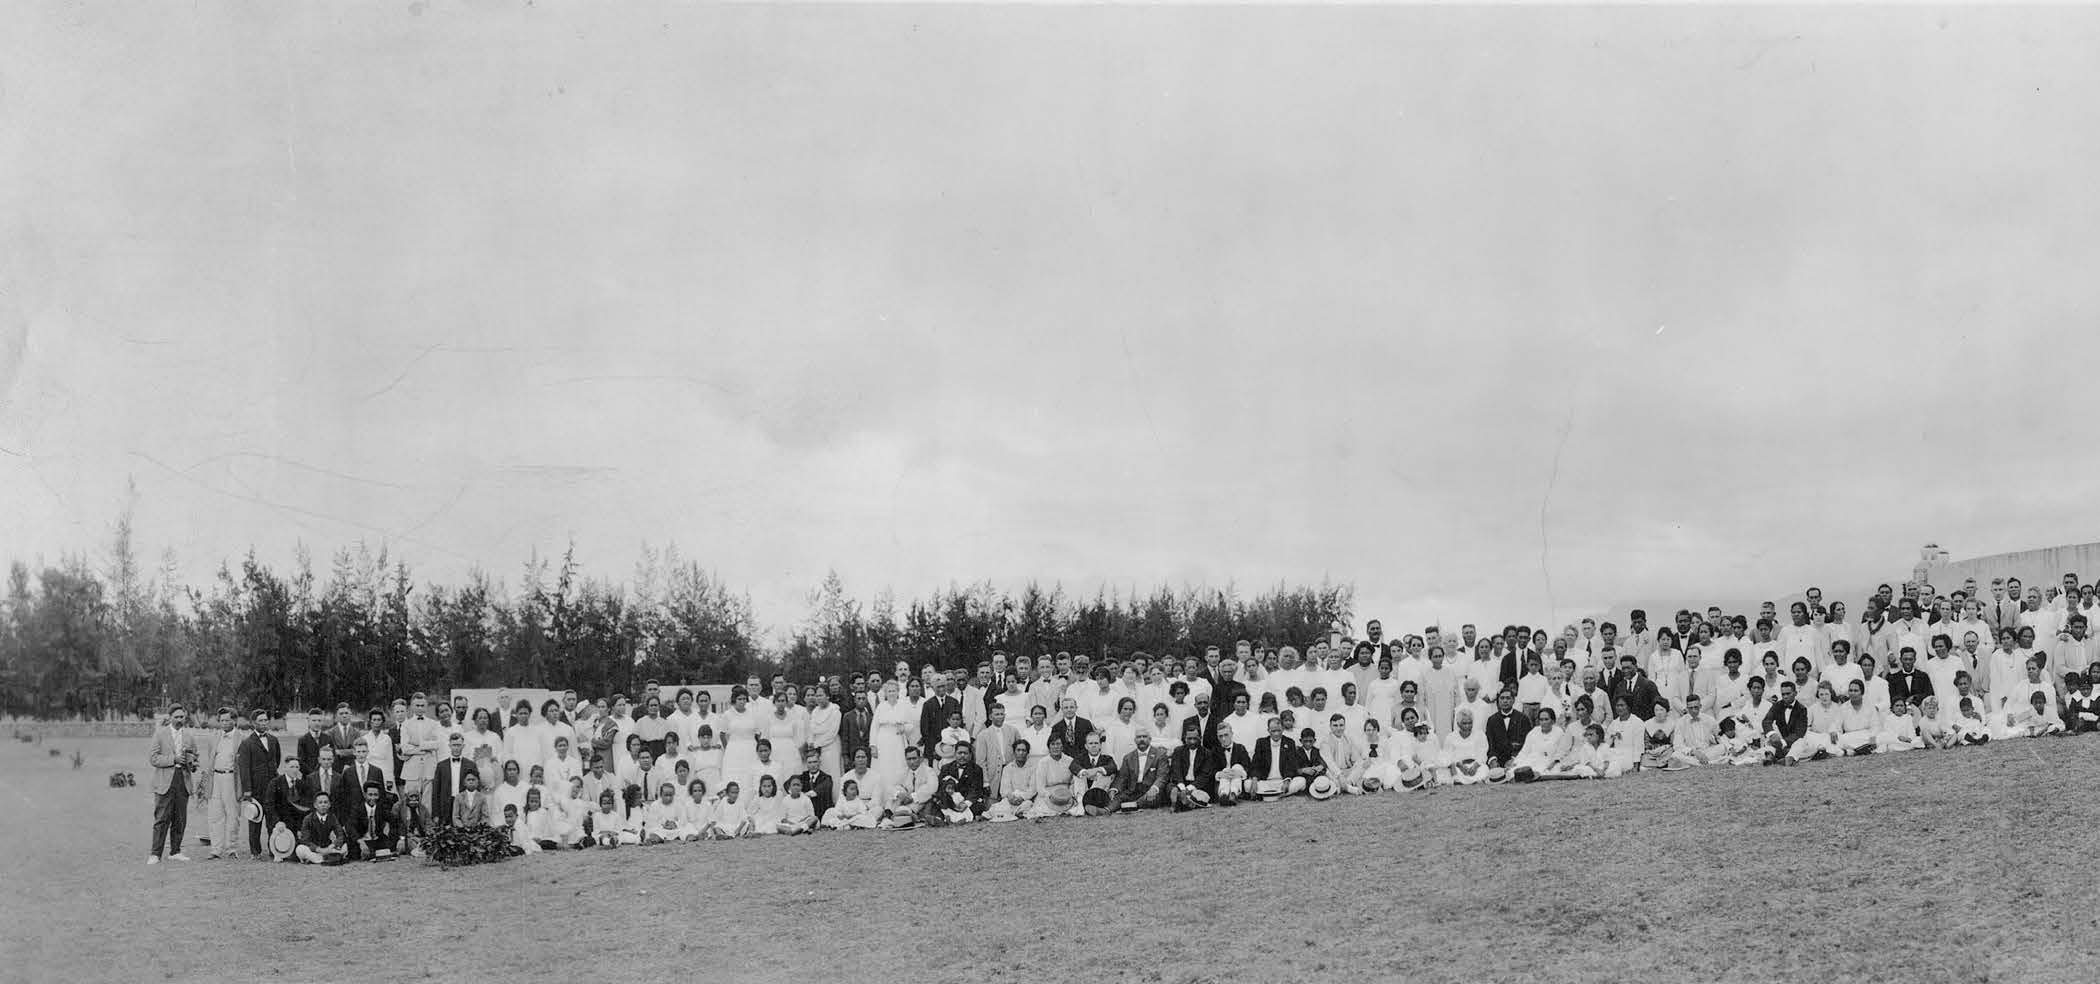 Island Saints in front of the Laie Hawaii Temple in July 1920. Courtesy of Church History Library.